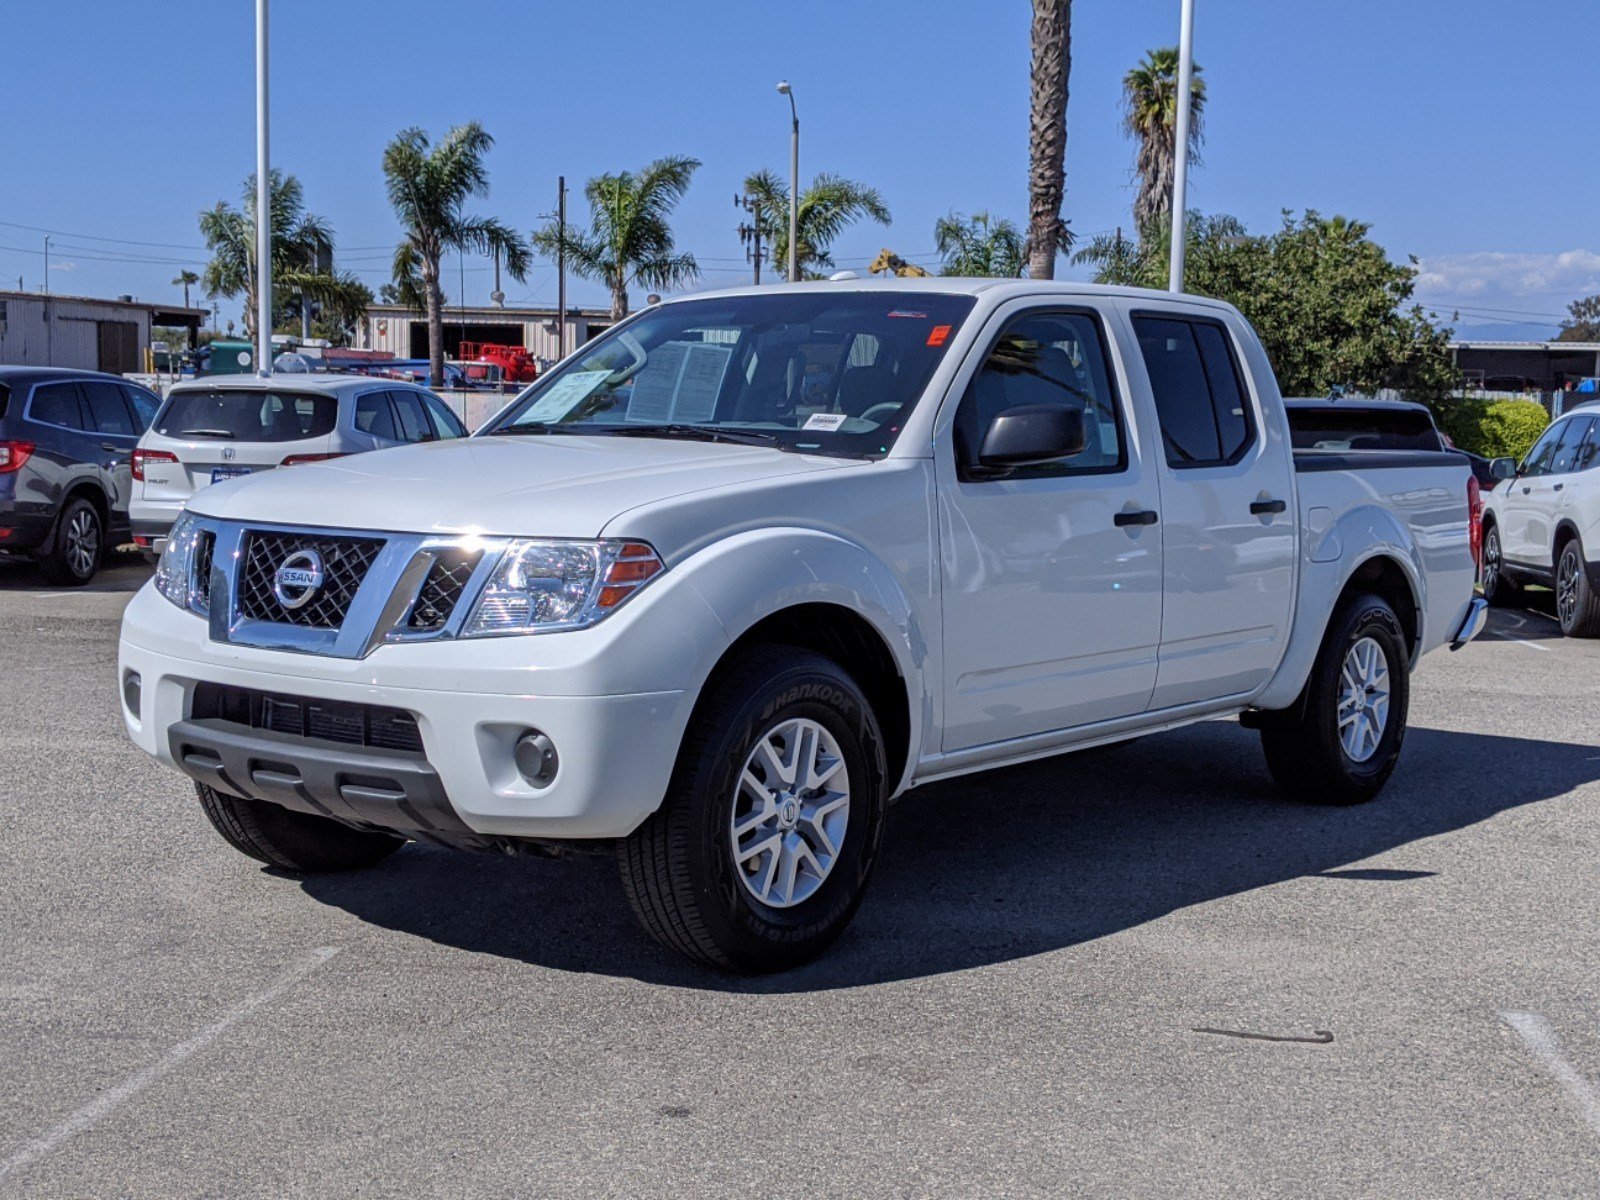 PreOwned 2018 Nissan Frontier SV V6 Crew Cab Pickup in